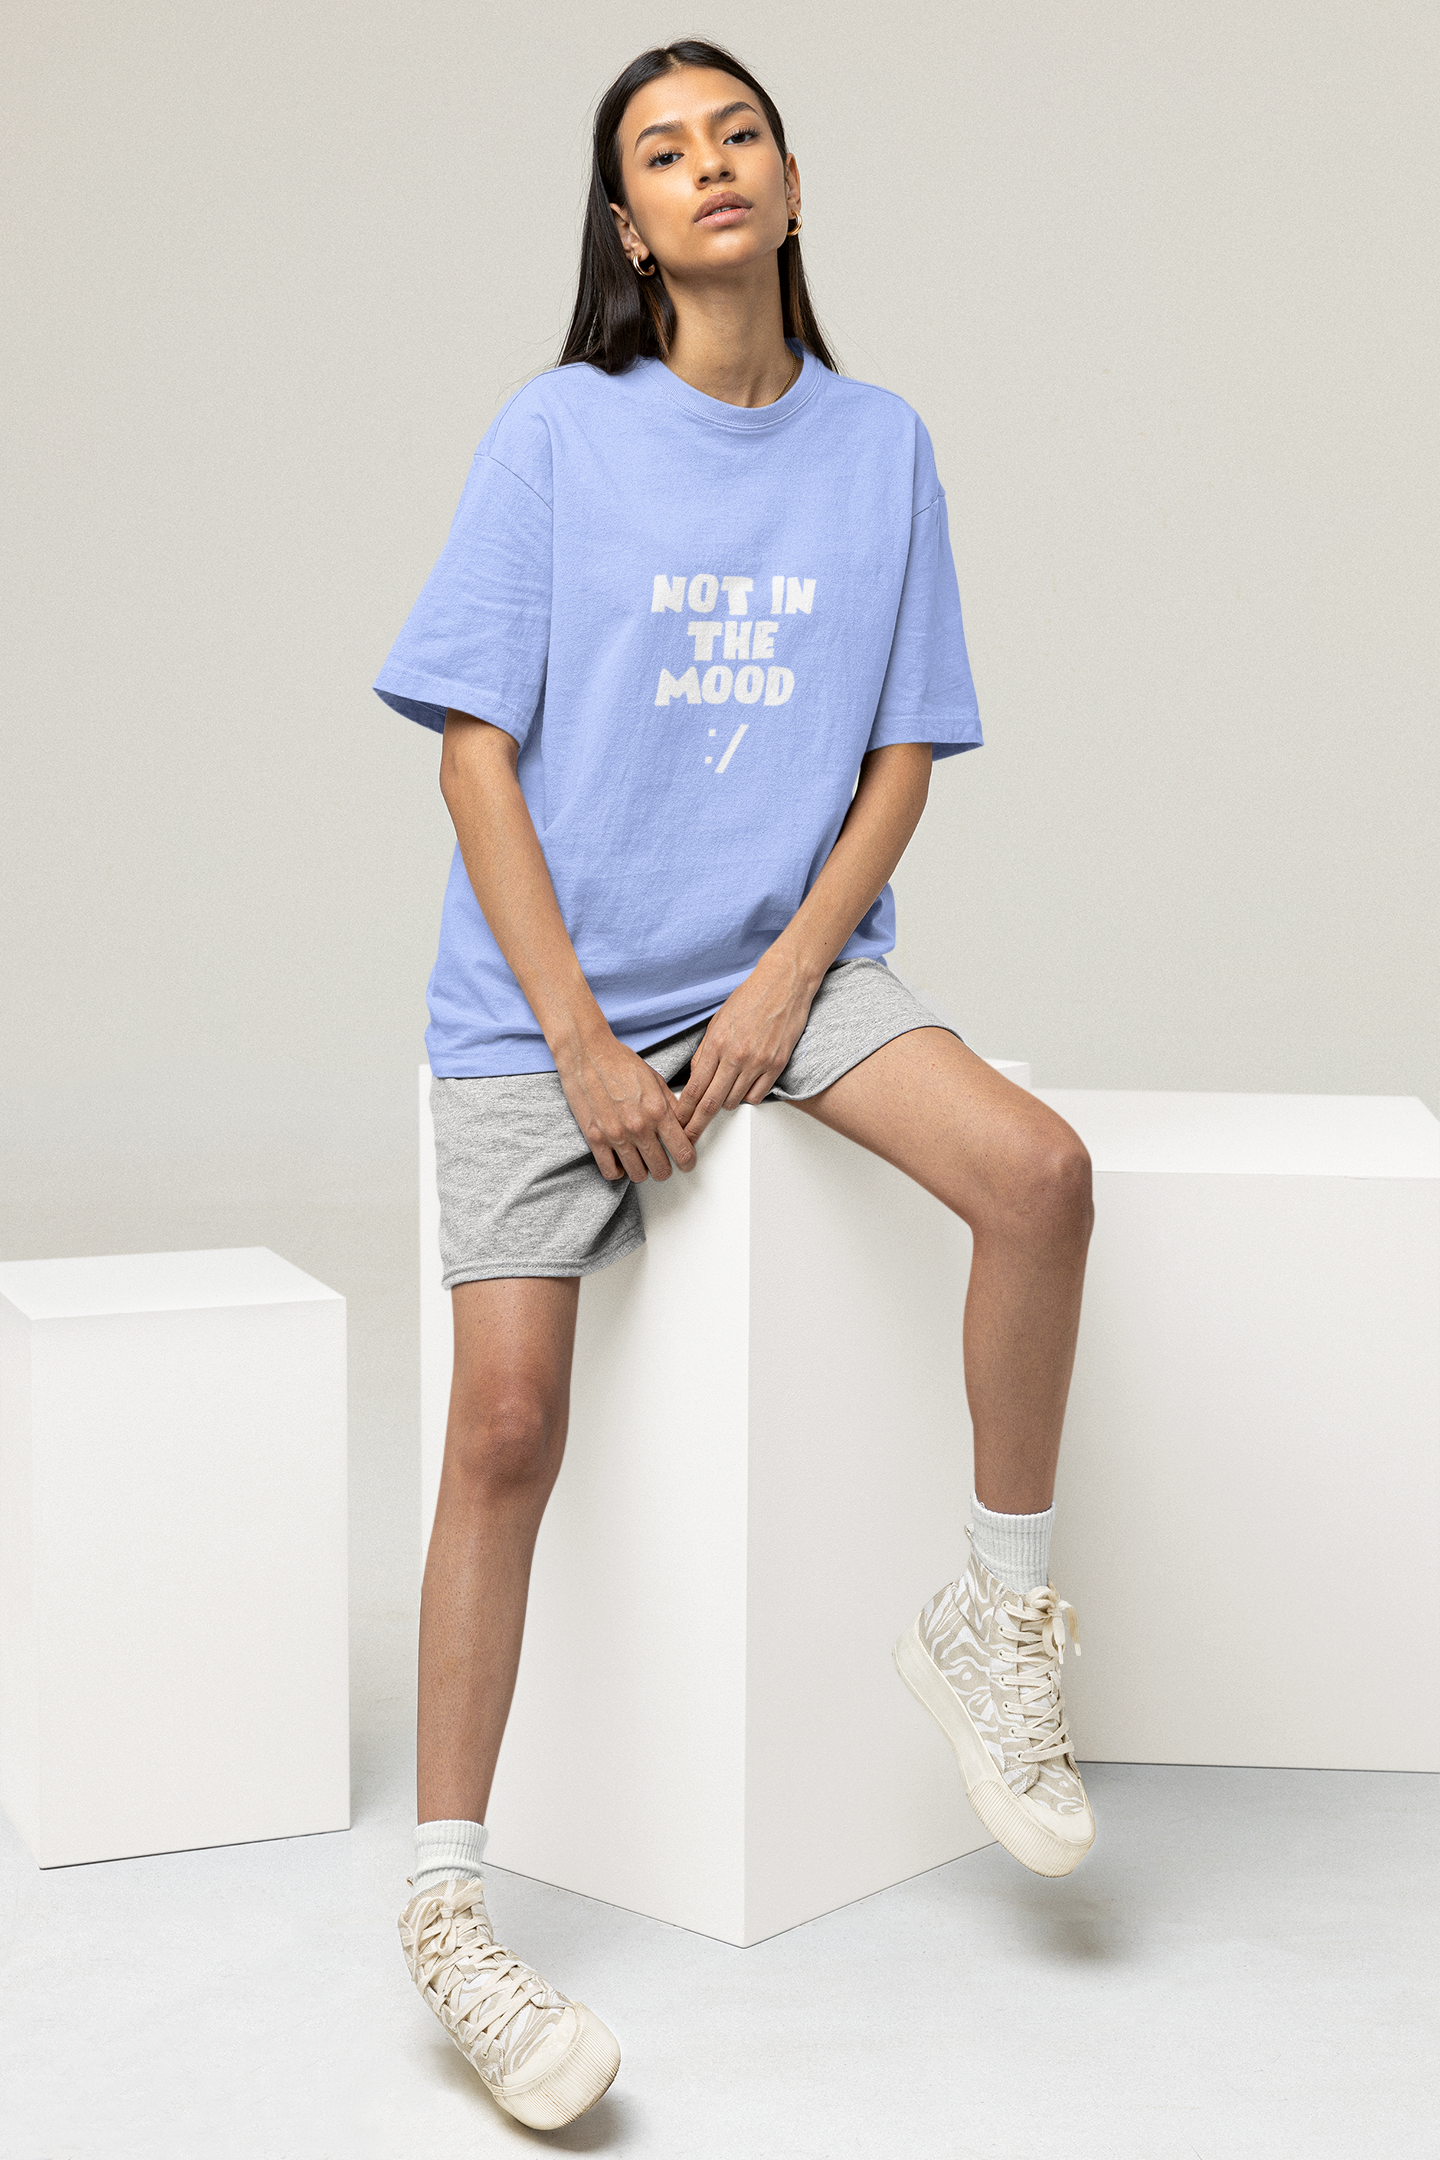 OVERSIZED TSHIRTS BABY BLUE: NOT IN MOOD